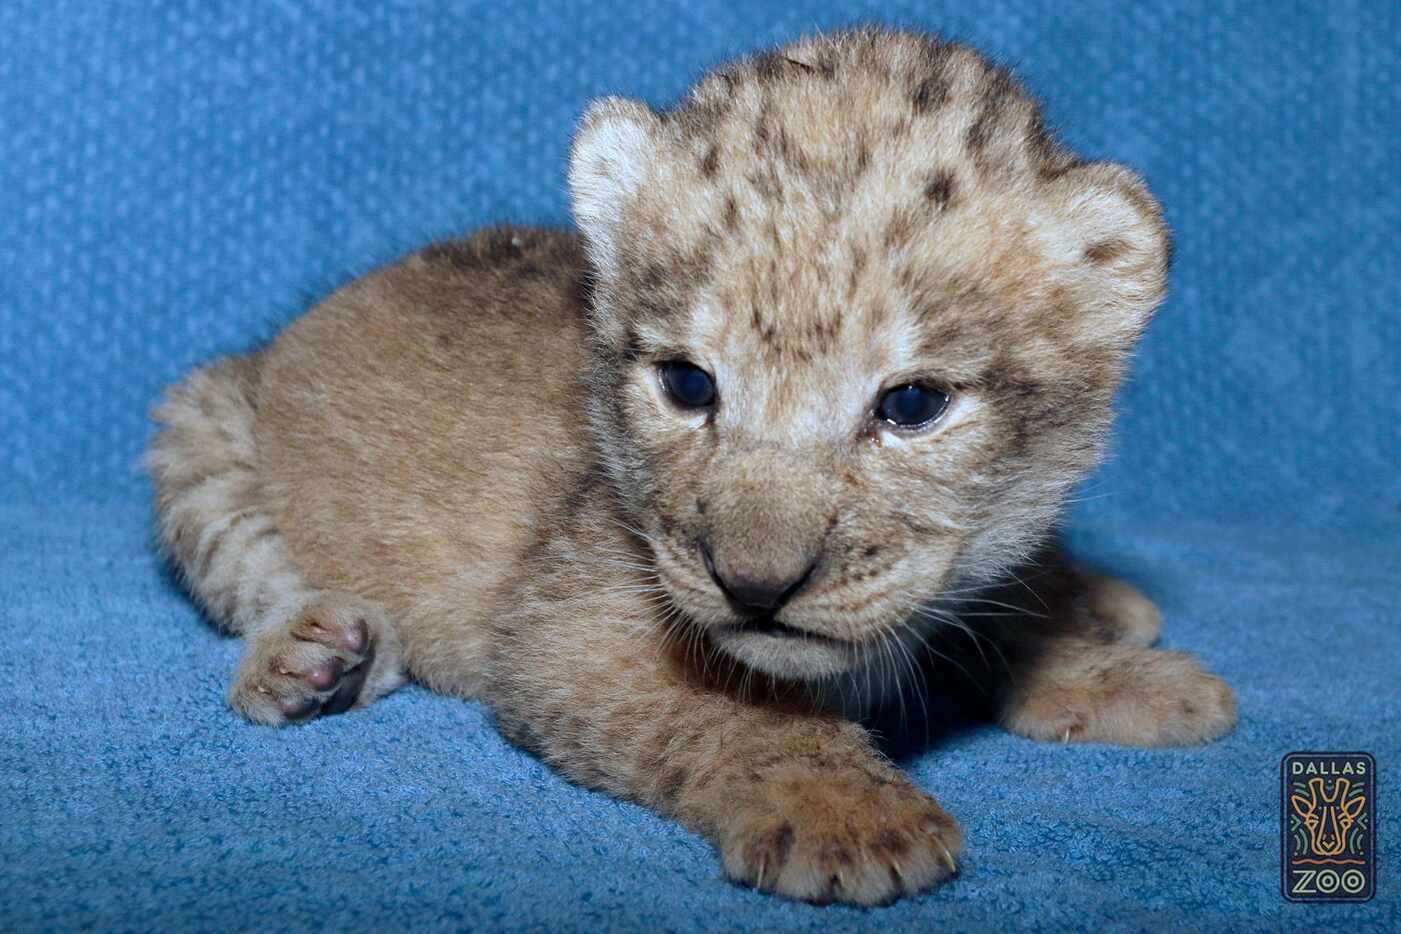 Lion cub Bahati Moja was born March 17 at the Dallas Zoo. She weighed at 2.8 pounds at birth.